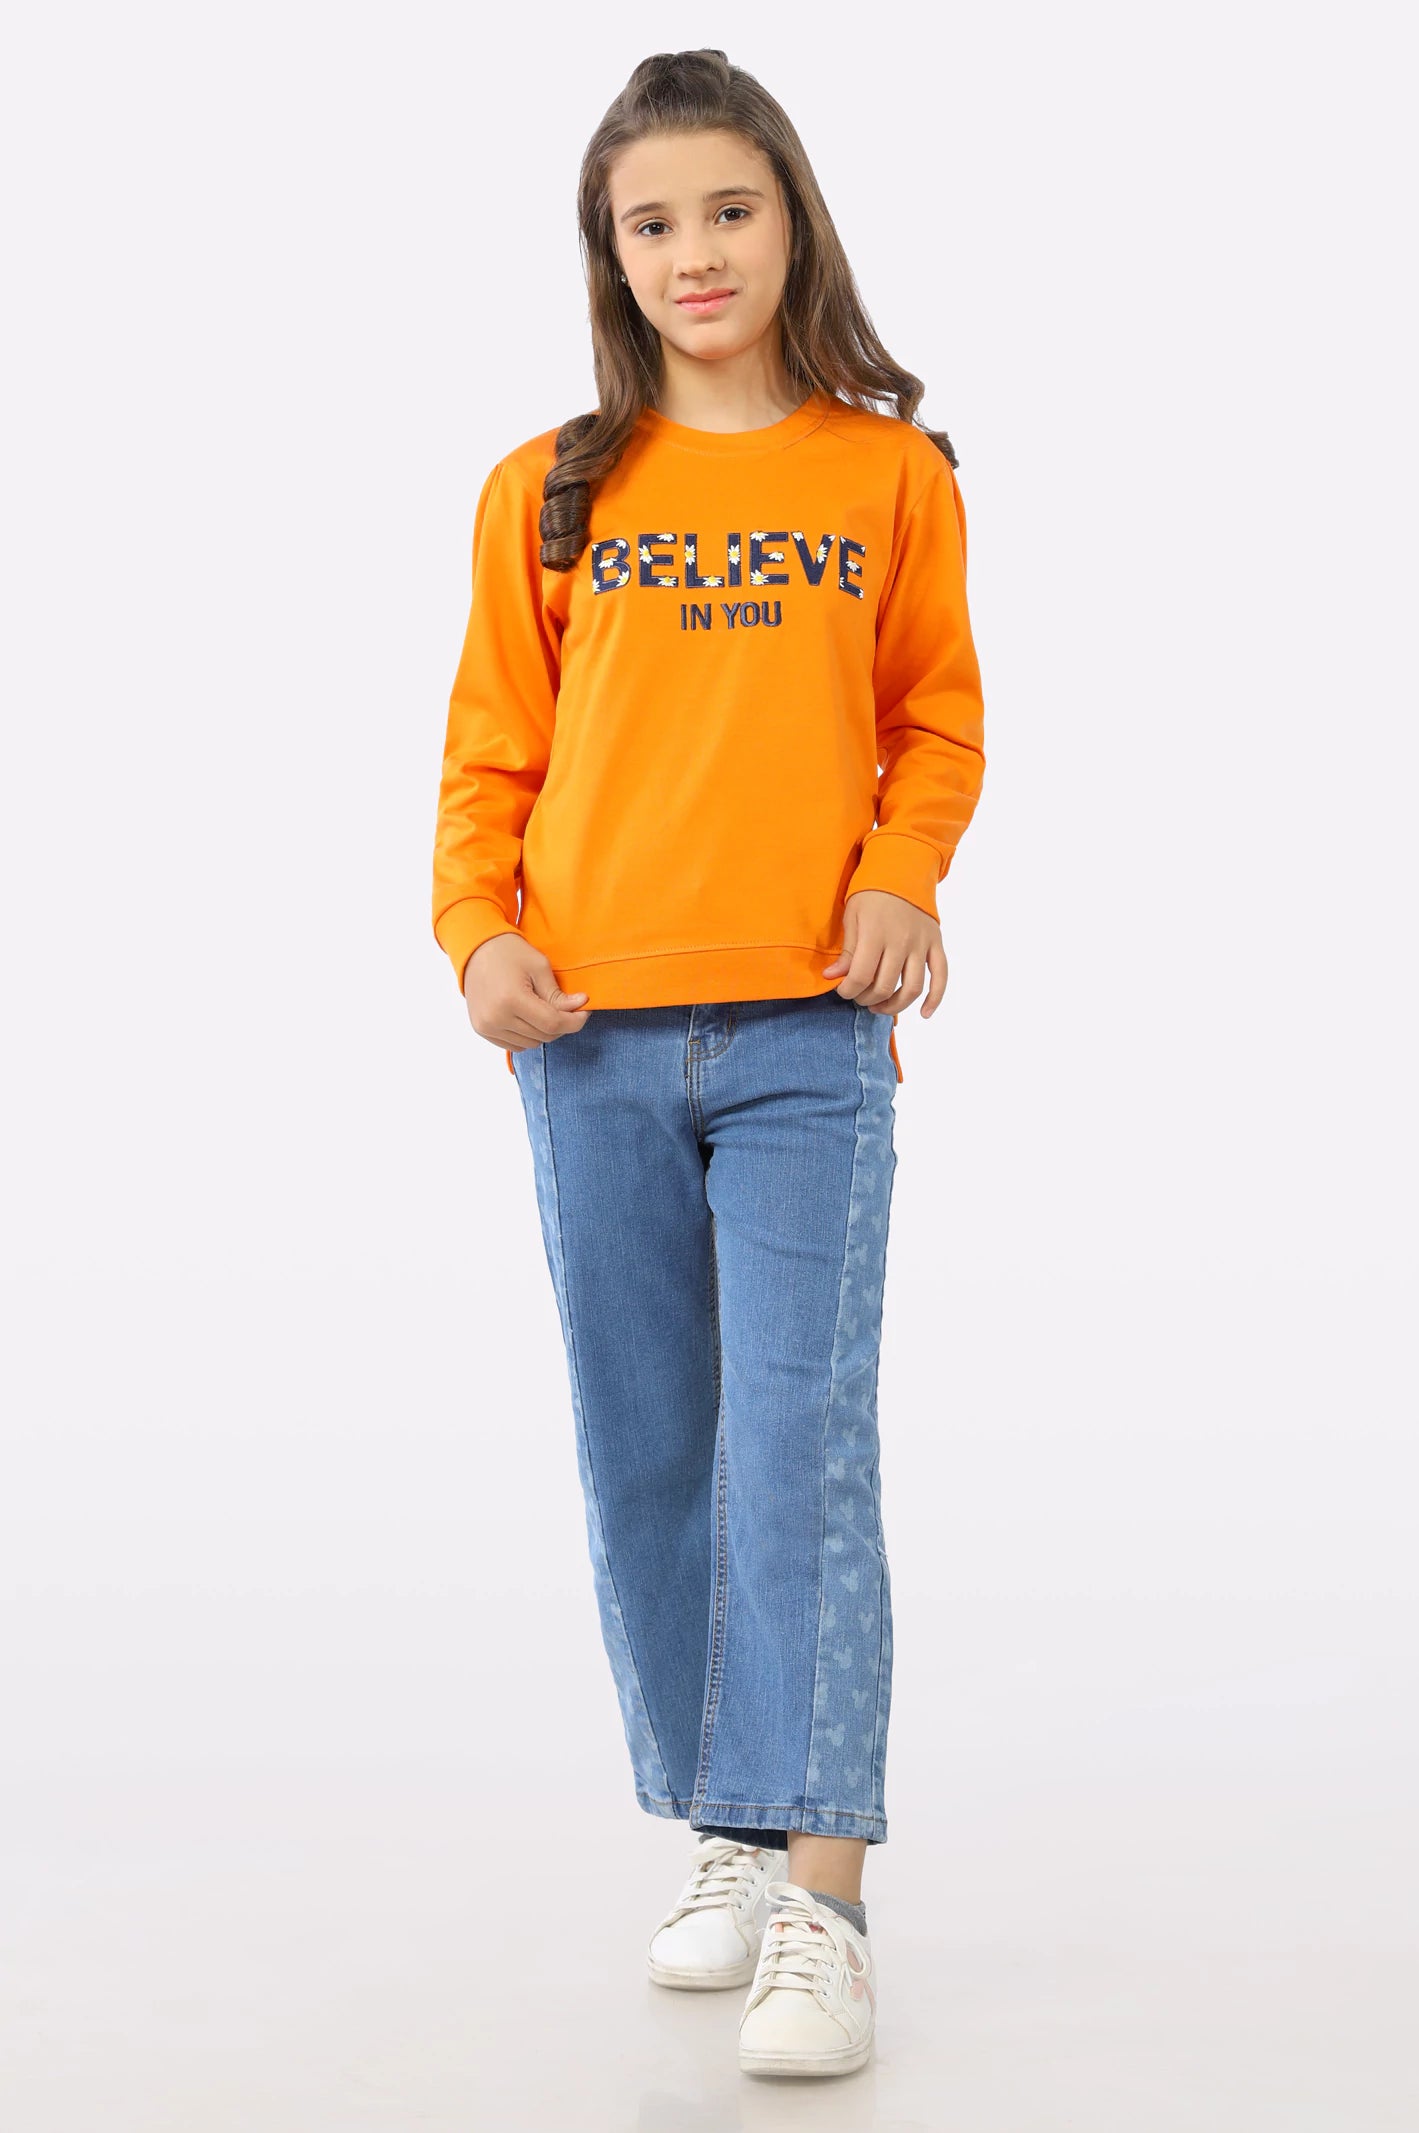 Orange Embroidered Girls Sweatshirt From Diners